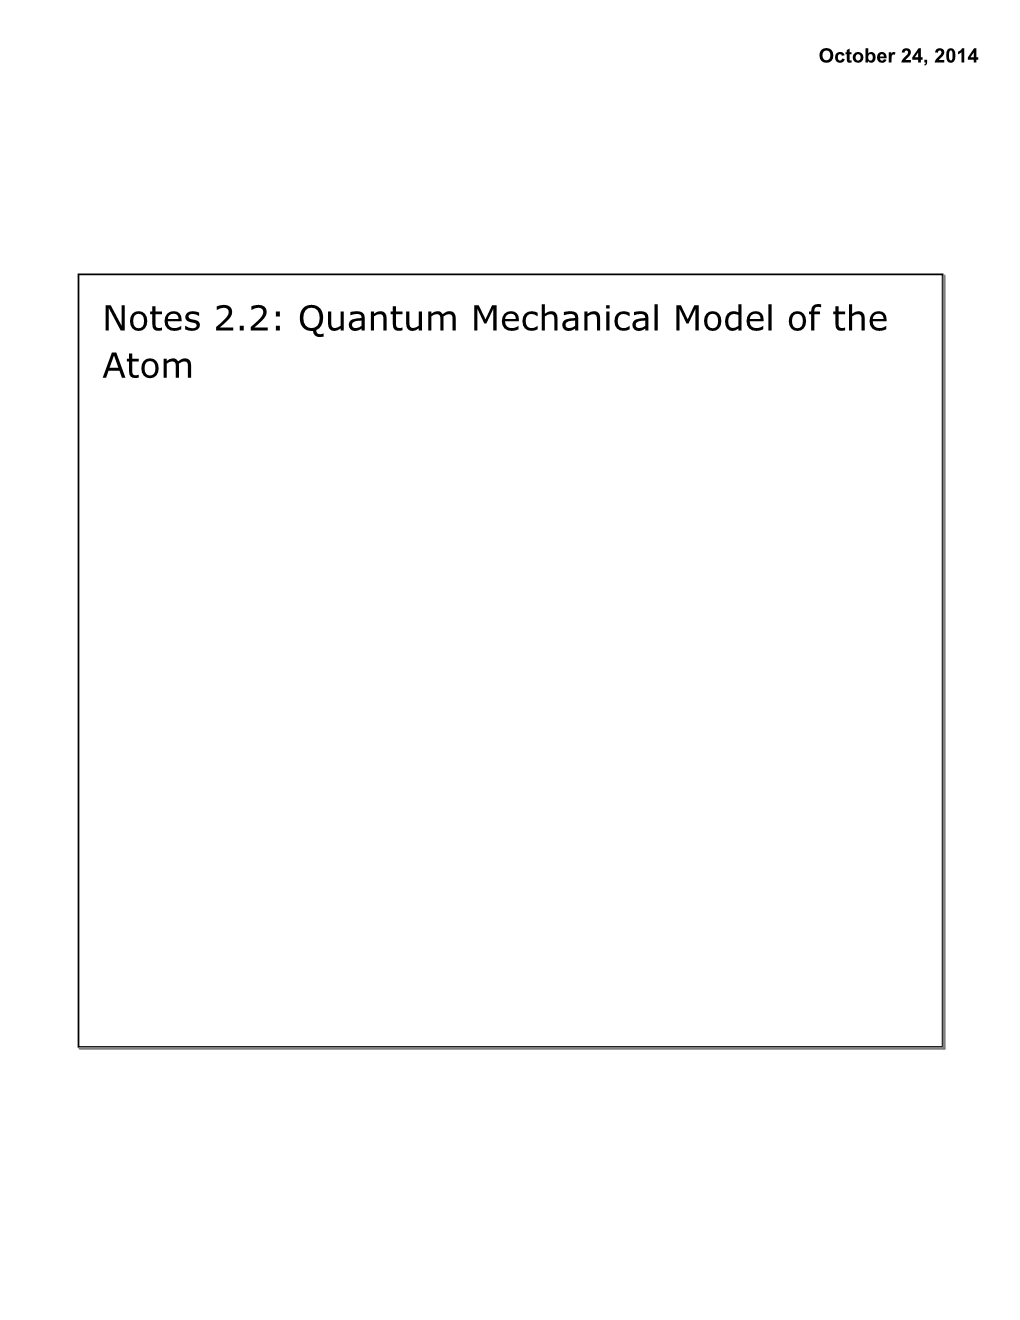 Notes 2.2: Quantum Mechanical Model of the Atom October 24, 2014